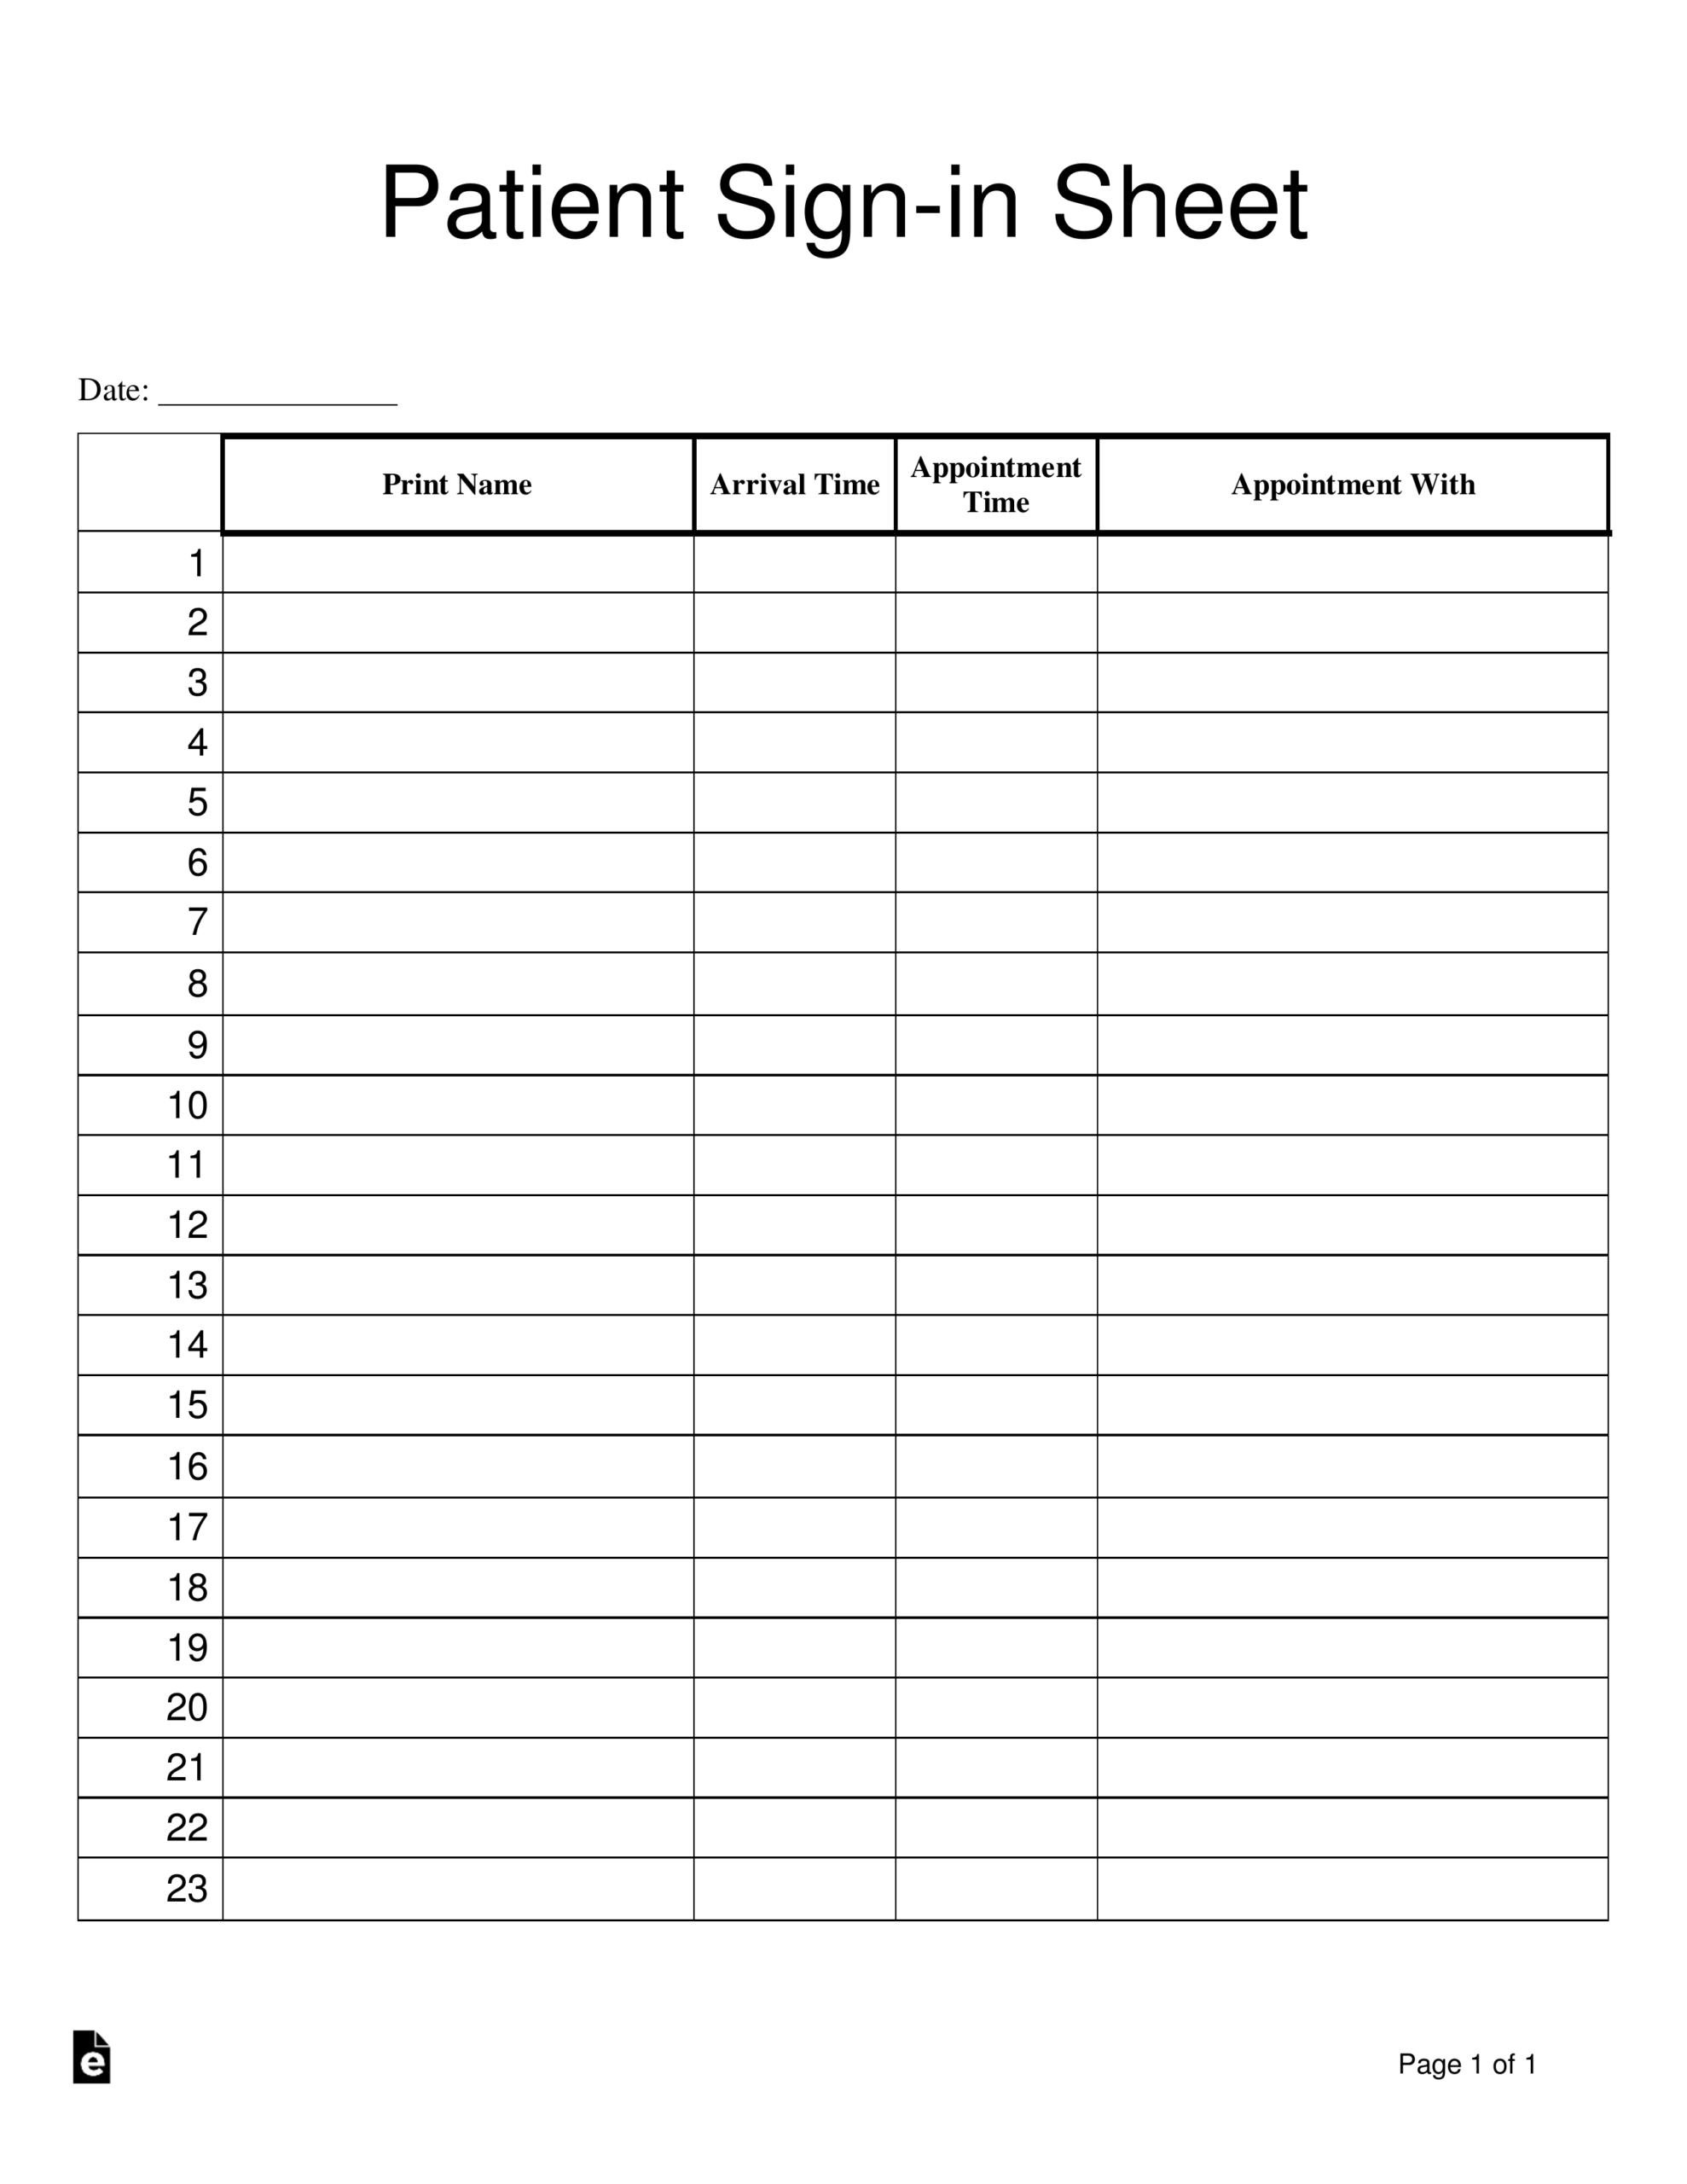 Patient Sign In Sheet Template | Eforms – Free Fillable Forms With Appointment Sheet Template Word